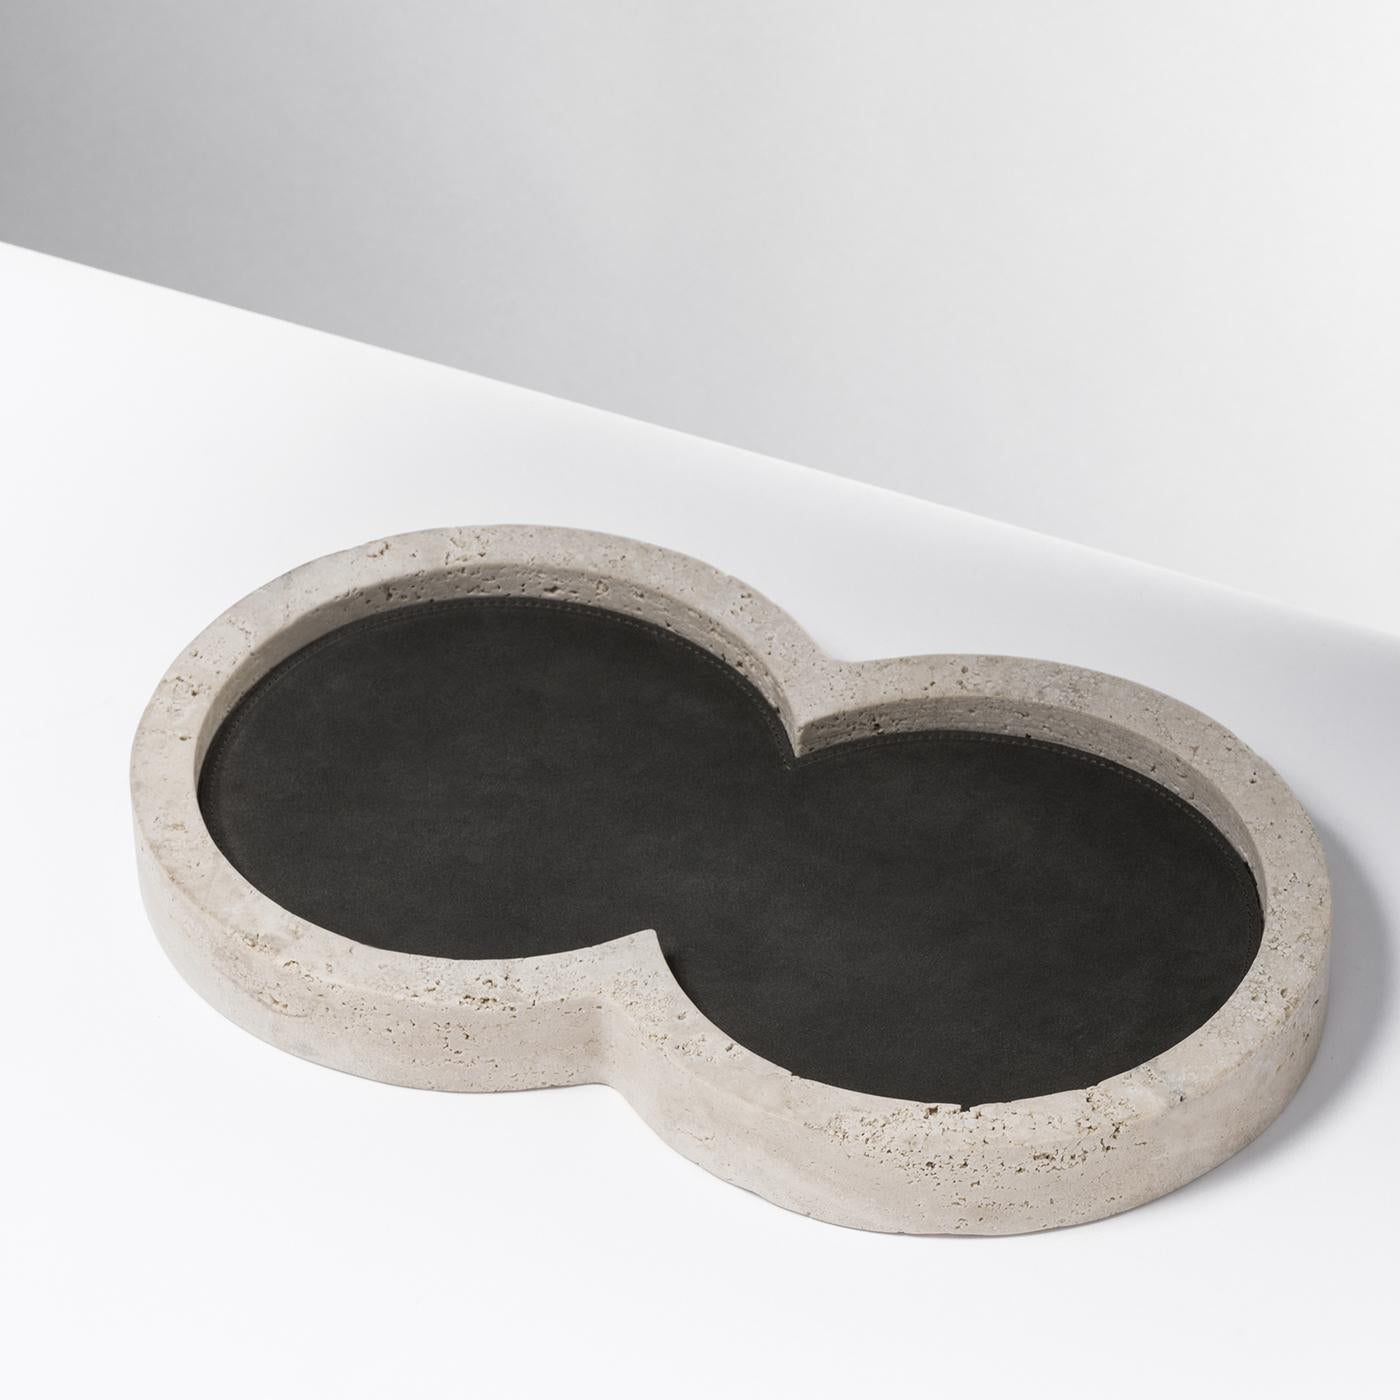 Striking in its simplicity, this valet tray is a sophisticated addition to an entryway. The original figure-eight silhouette is made entirely of cream-colored travertine limestone, a prized Italian stone. The frame is lined in black nappa leather, a